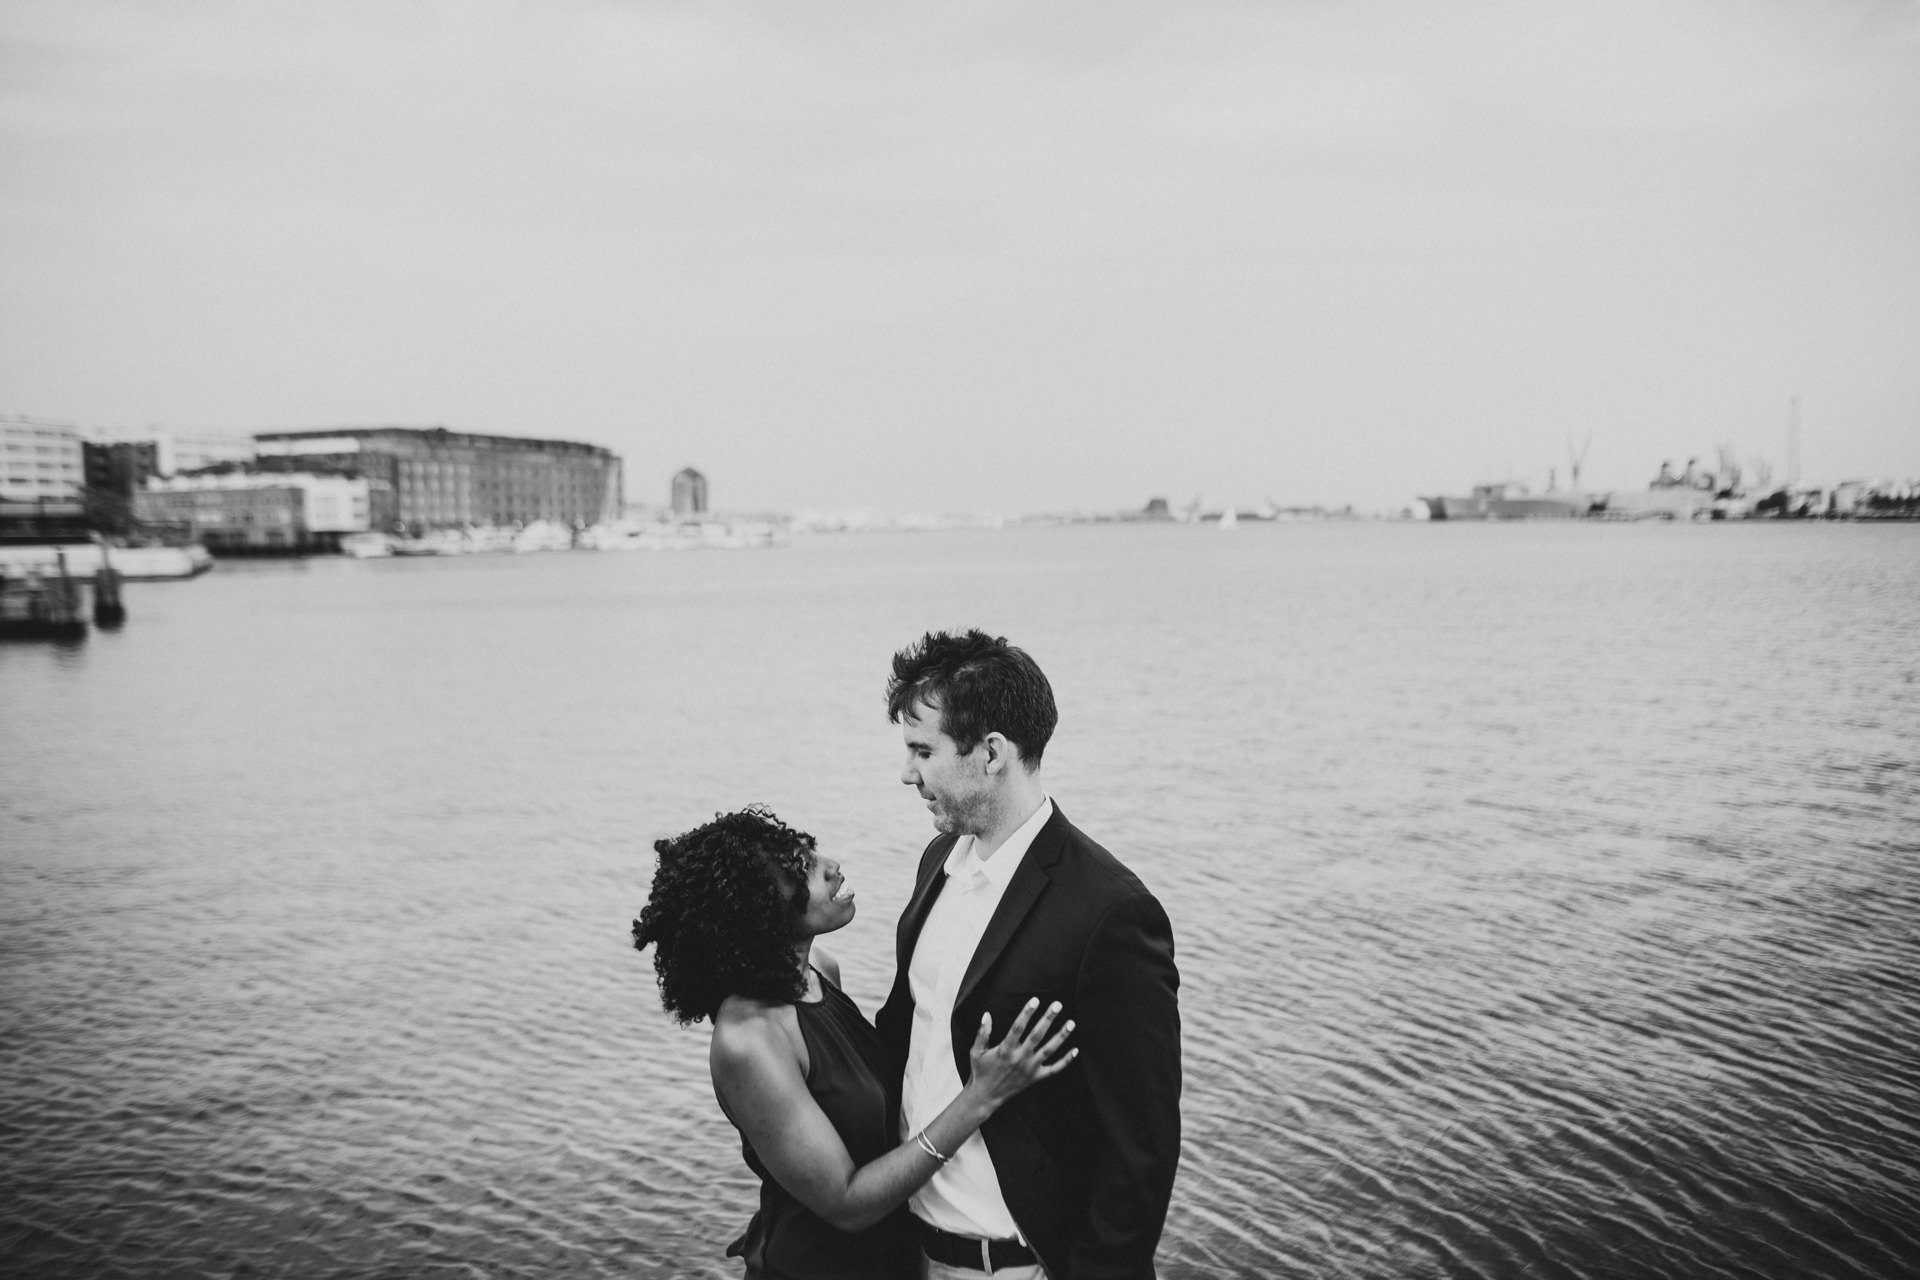  baltimore engagement photo locations 